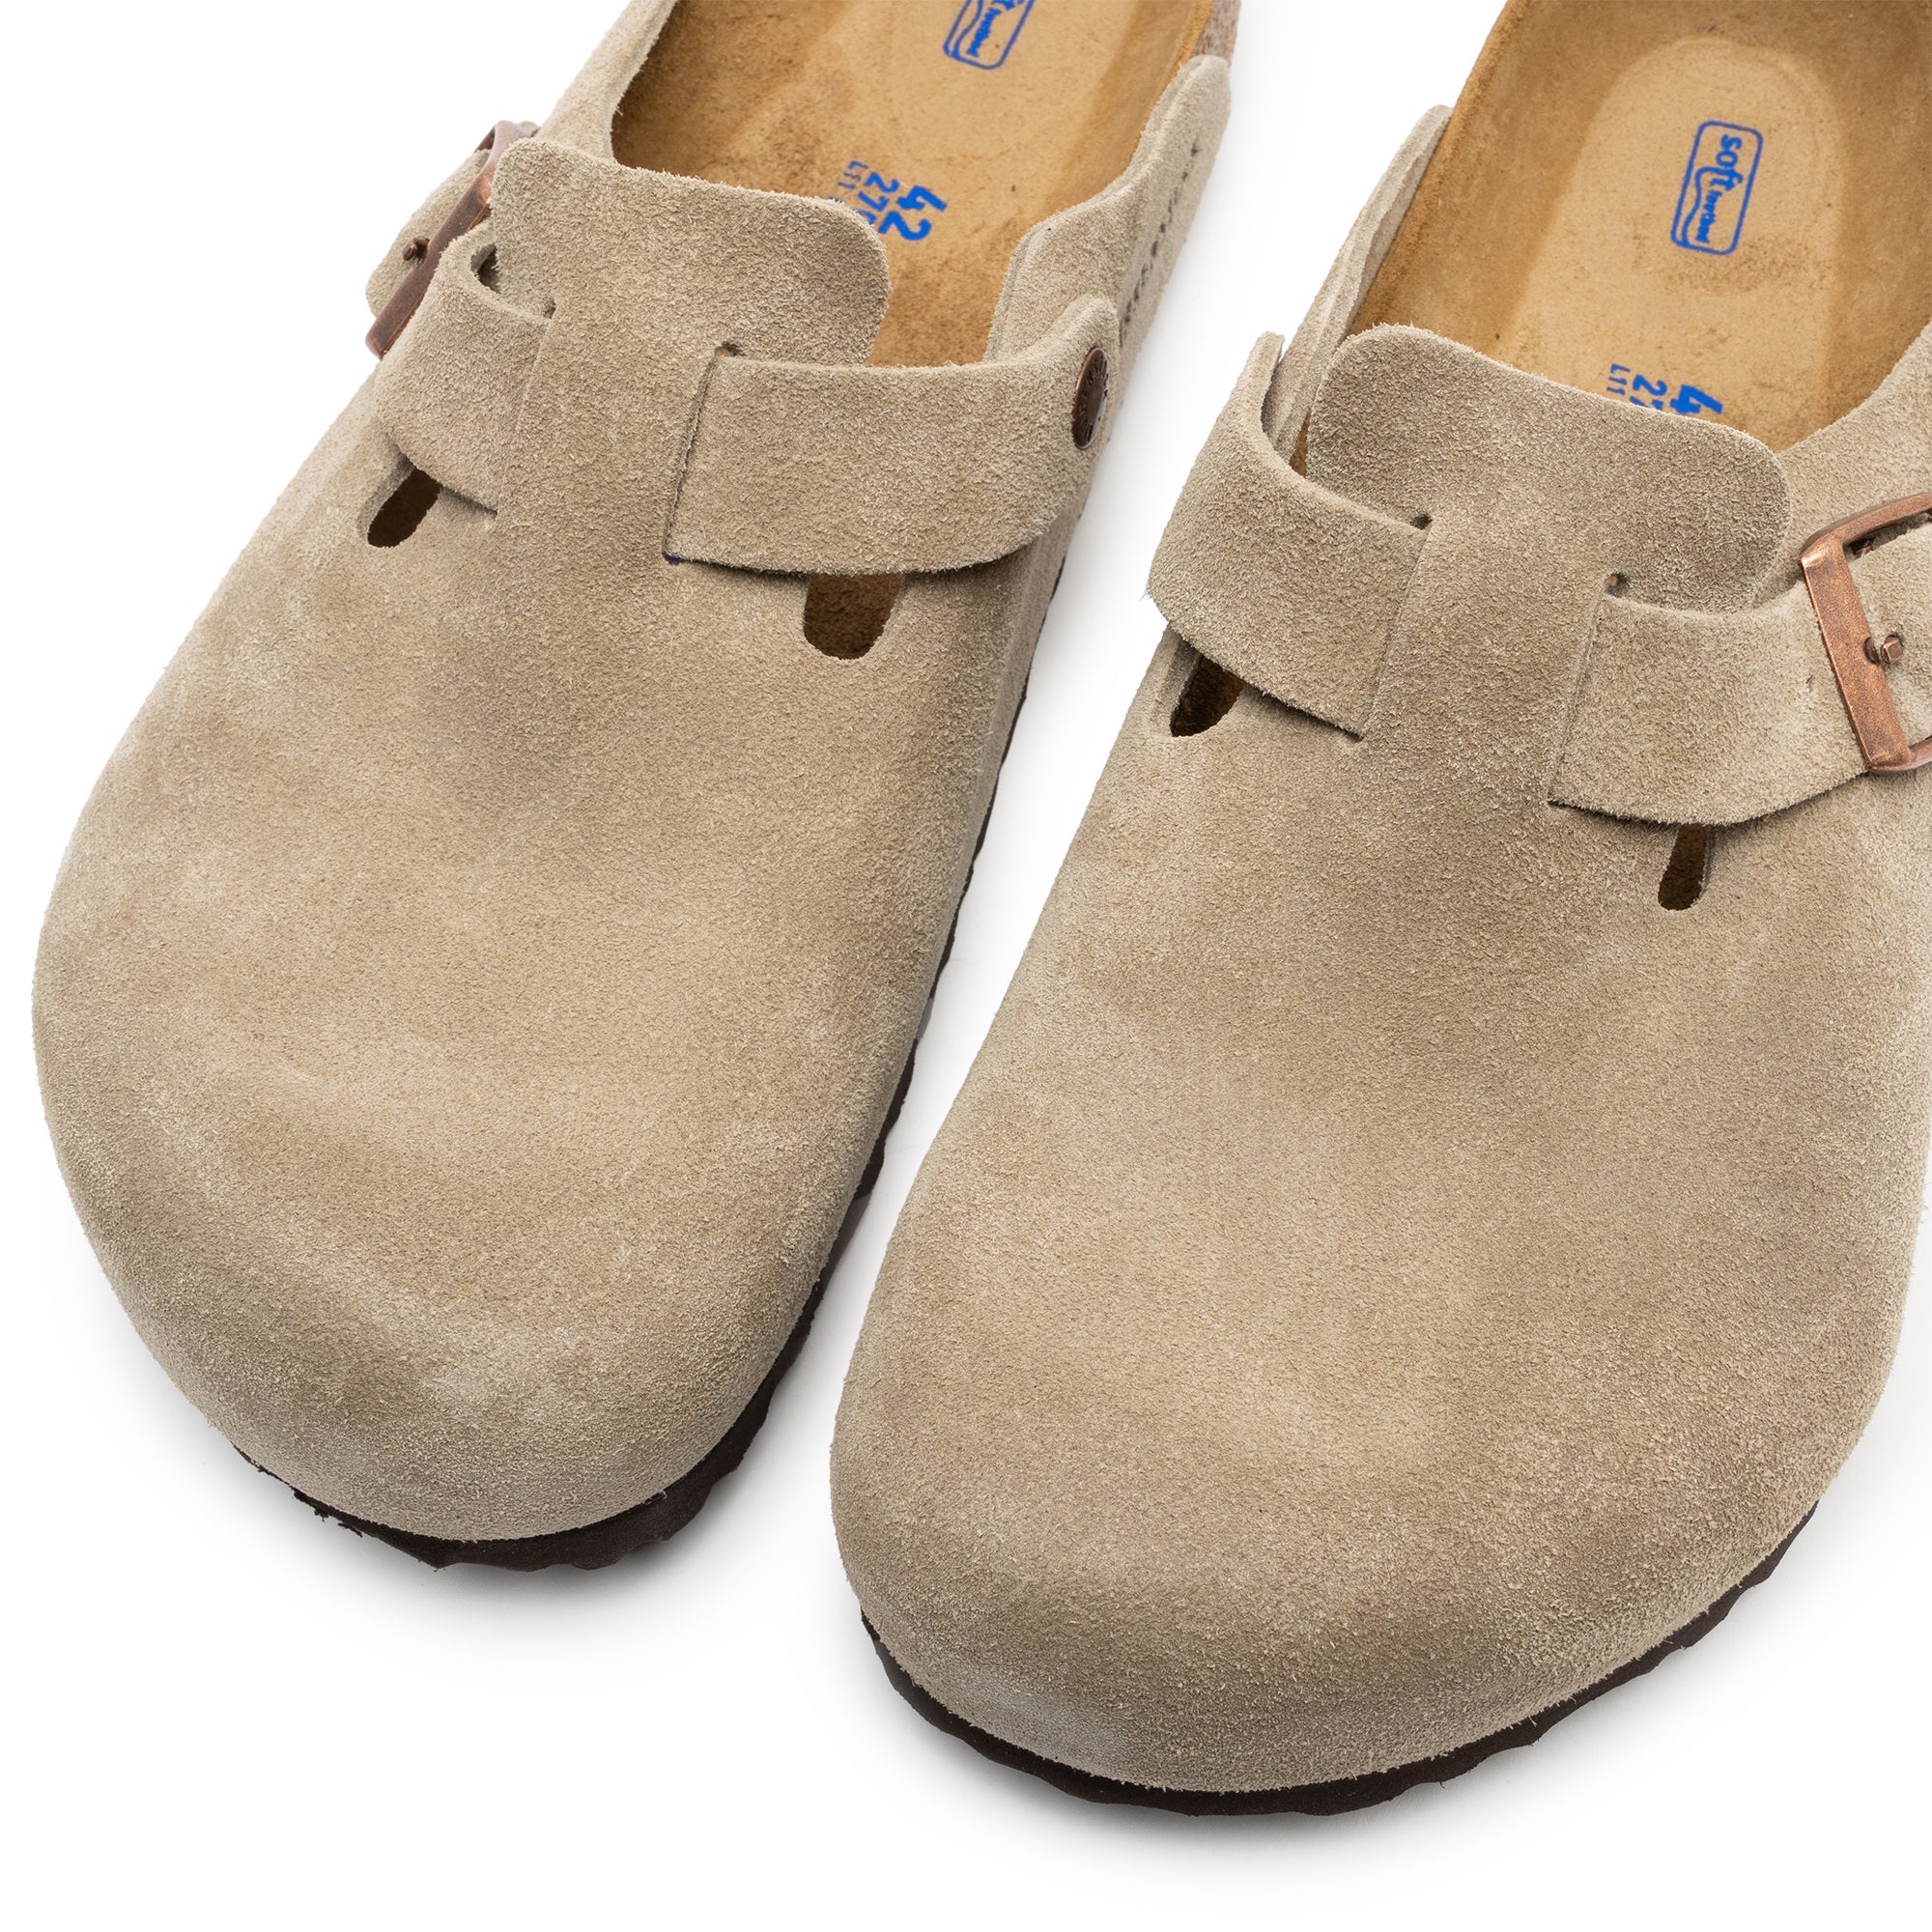 Cushioned suede footbed lining